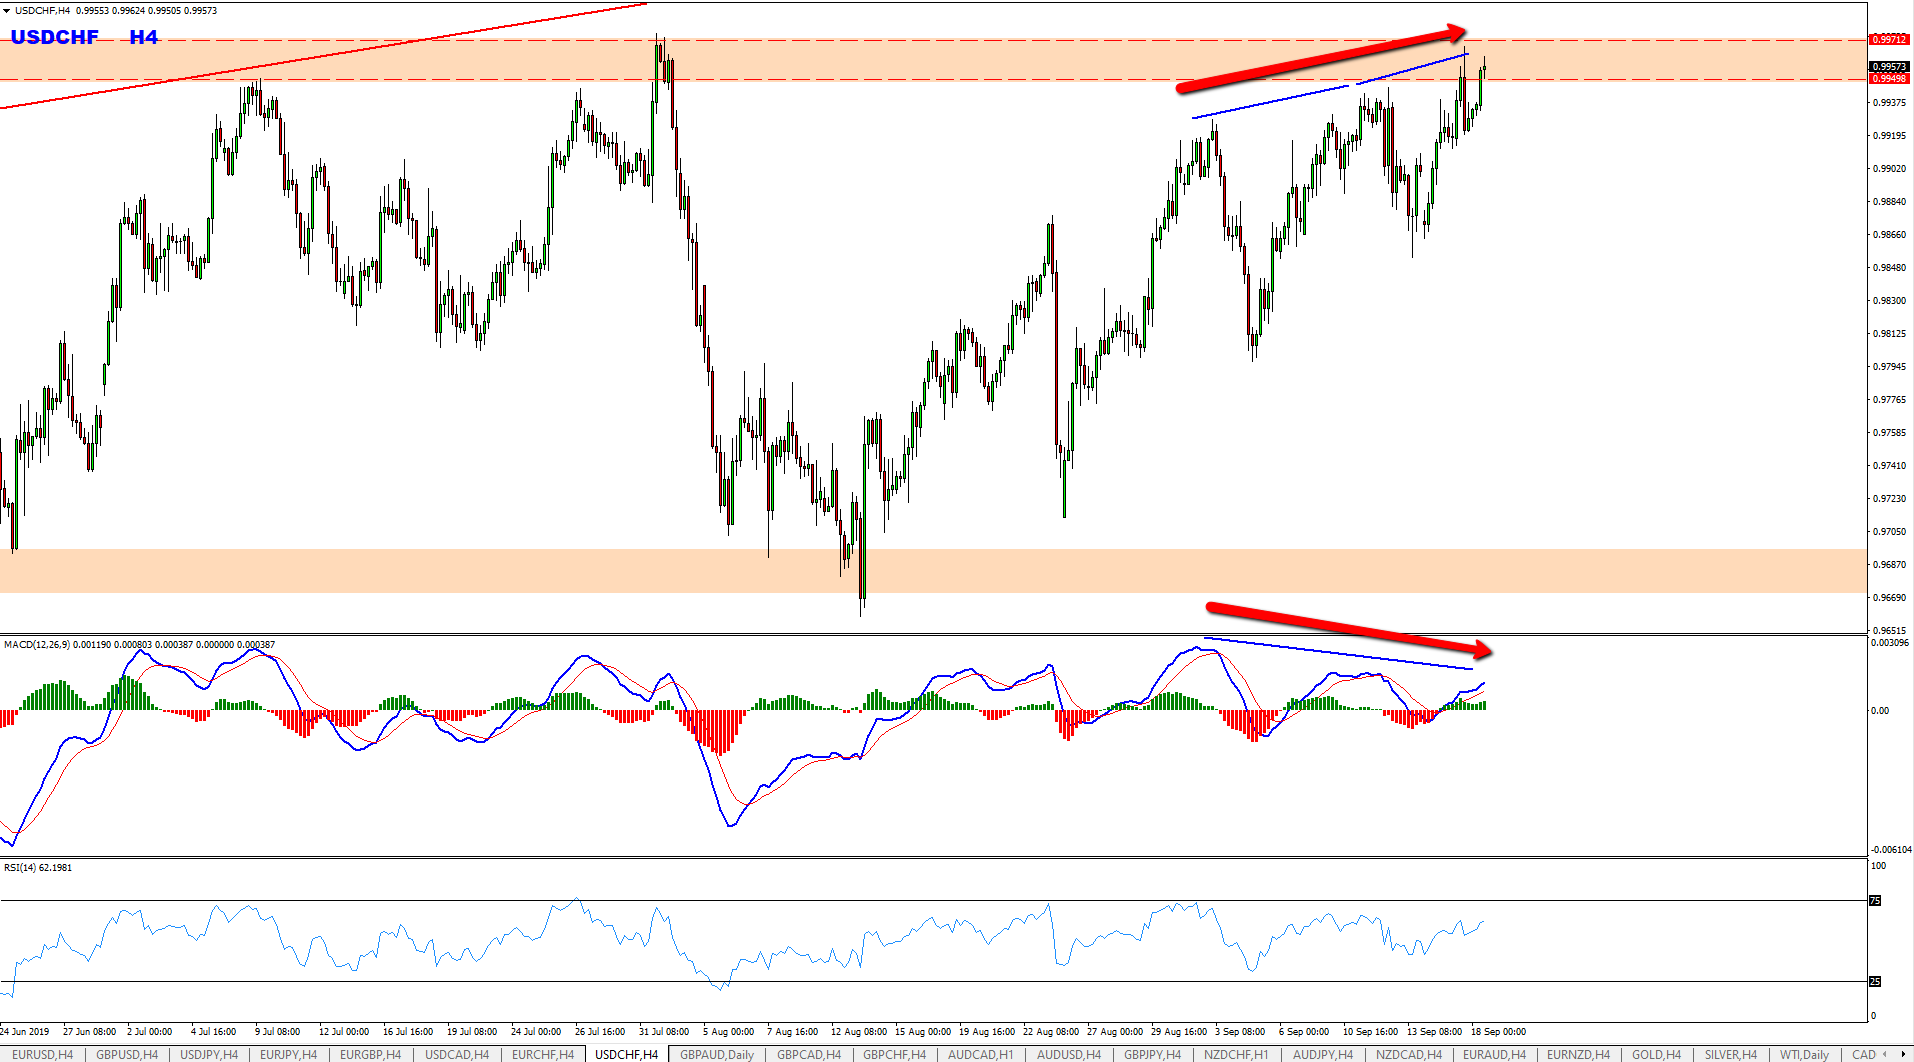 USDCHF Daily Range Provides Sell Opportunity